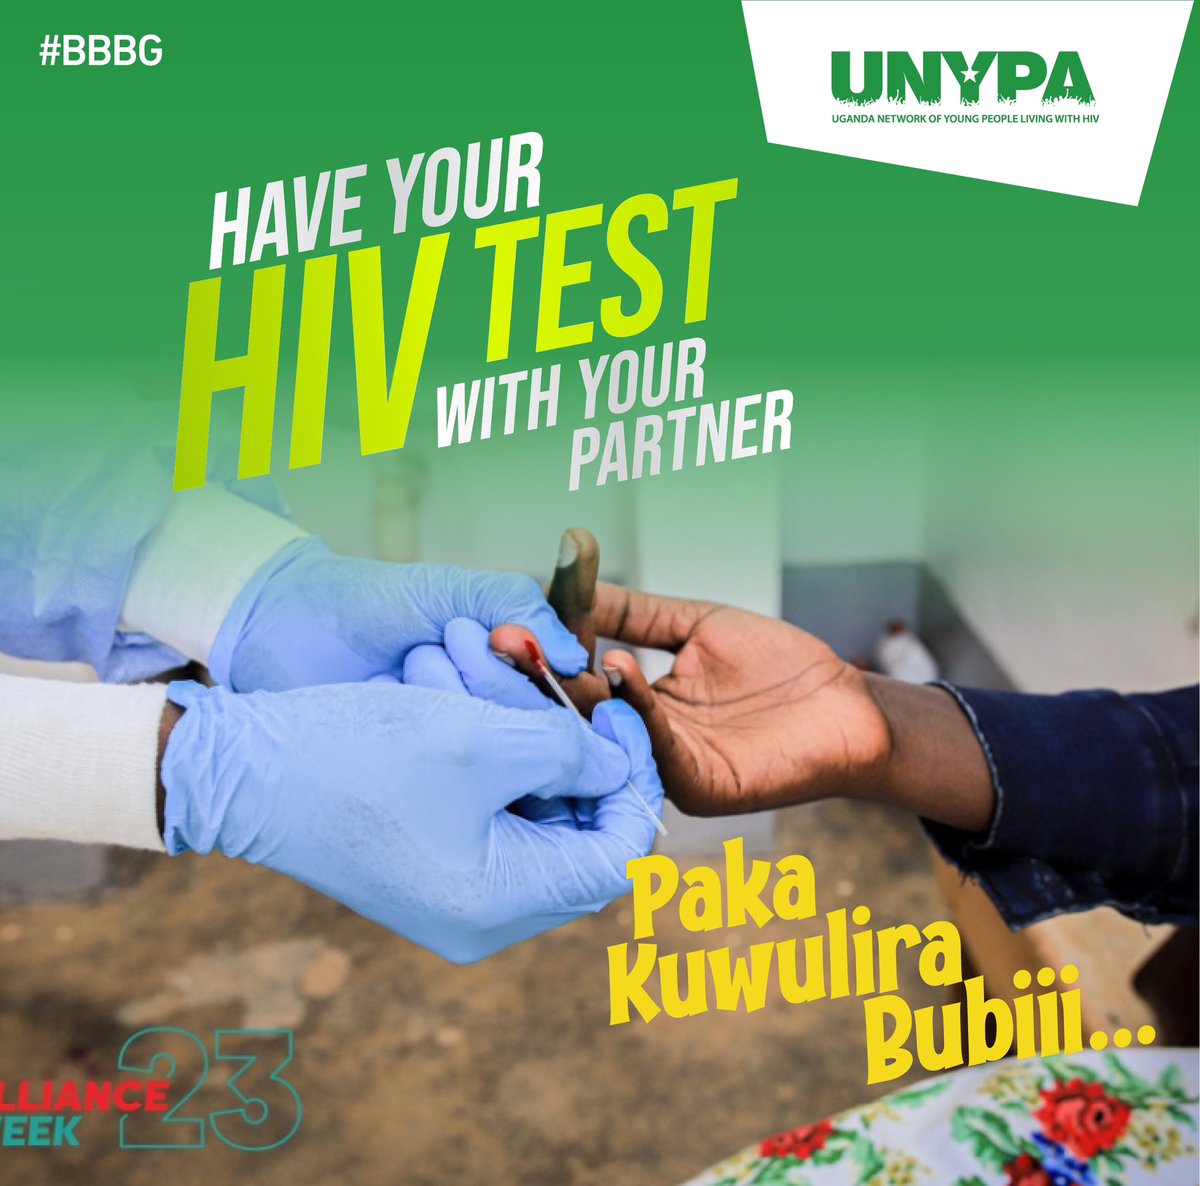 Yes, we agree that it is a Friday and you are thinking about that marriage 💍 weekend but knowing your and your partner’s HIV status gives you powerful information to help you take steps to keep you and your partner healthy. #BBBG